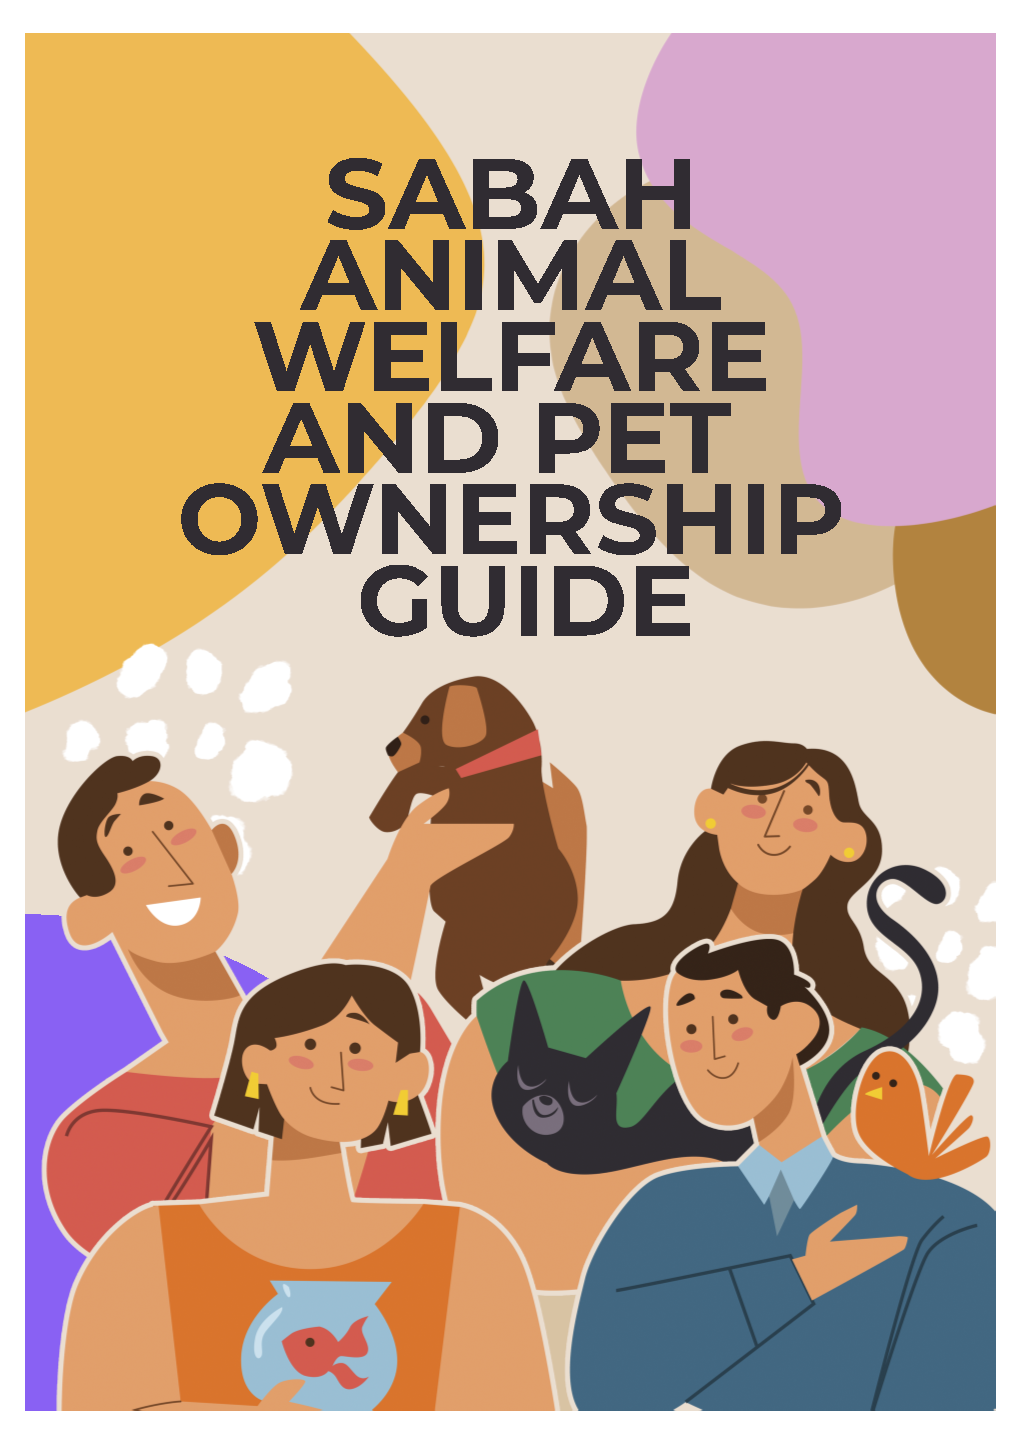 SABAH ANIMAL WELFARE and PET OWNERSHIP GUIDE 5 February 2020